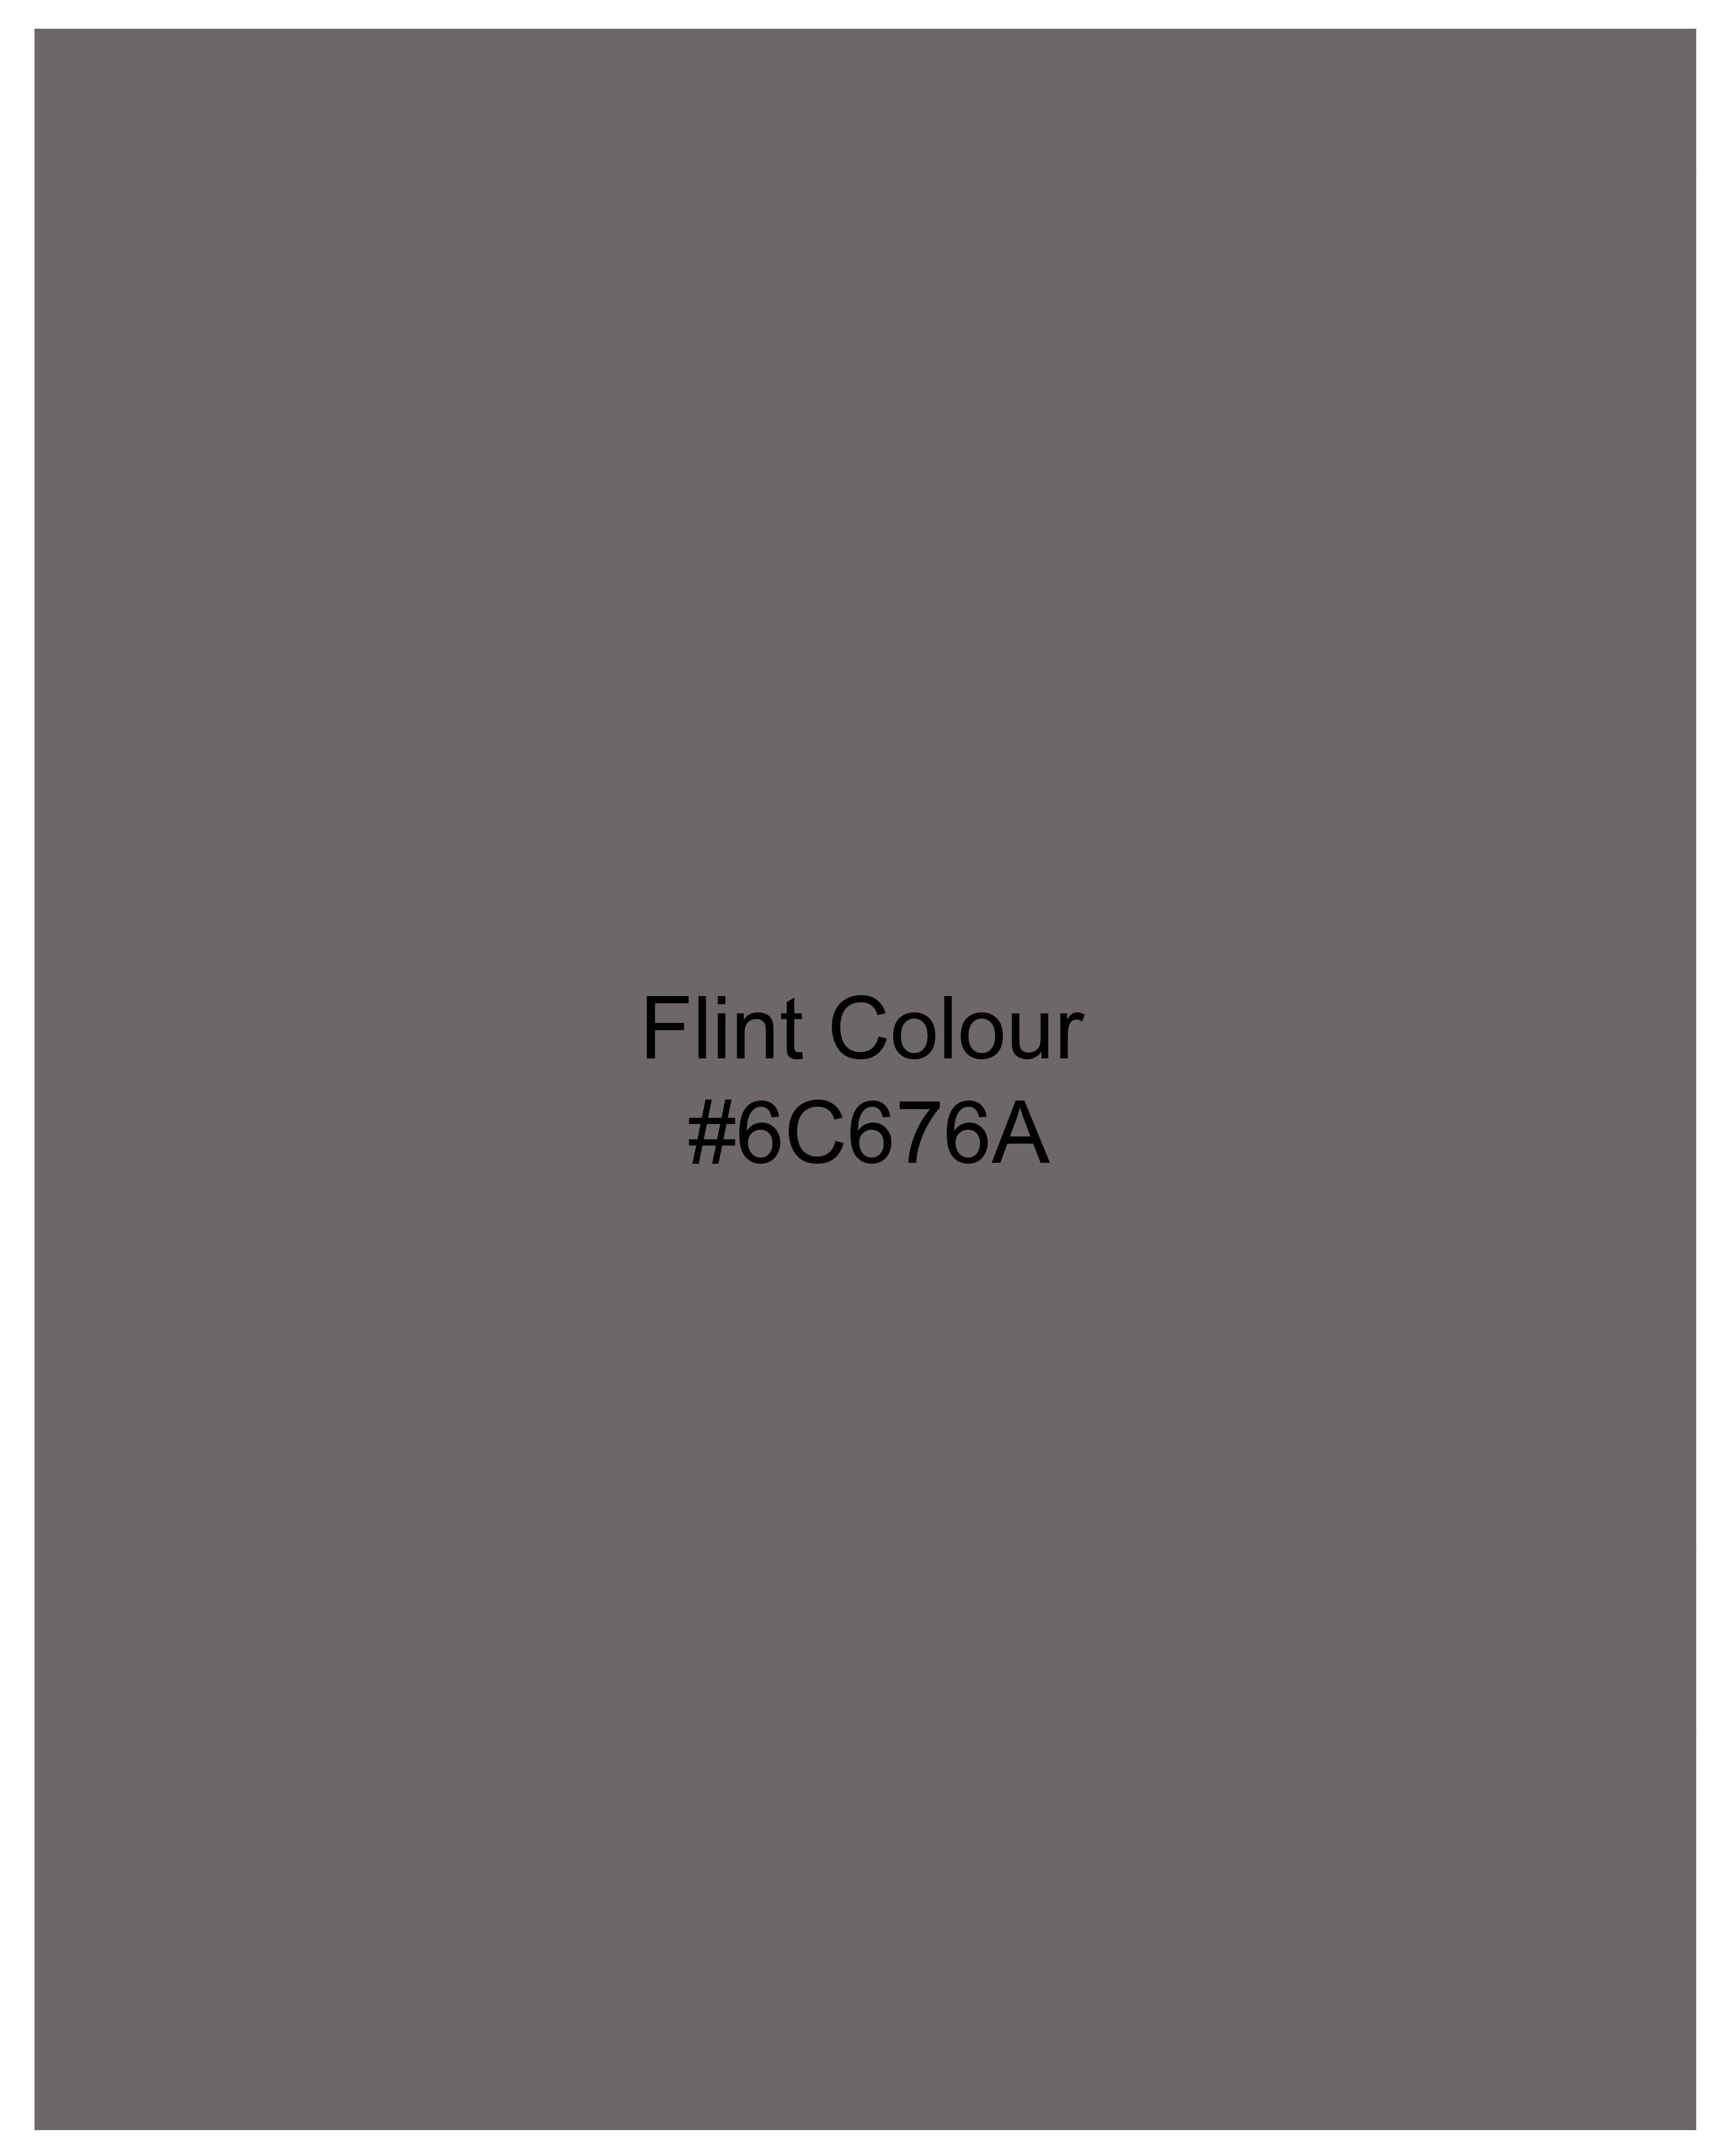 Flint Gray Multicolour Hand Painted Rinse Wash Denim J080-ART-32, J080-ART-34, J080-ART-36, J080-ART-38, J080-ART-40